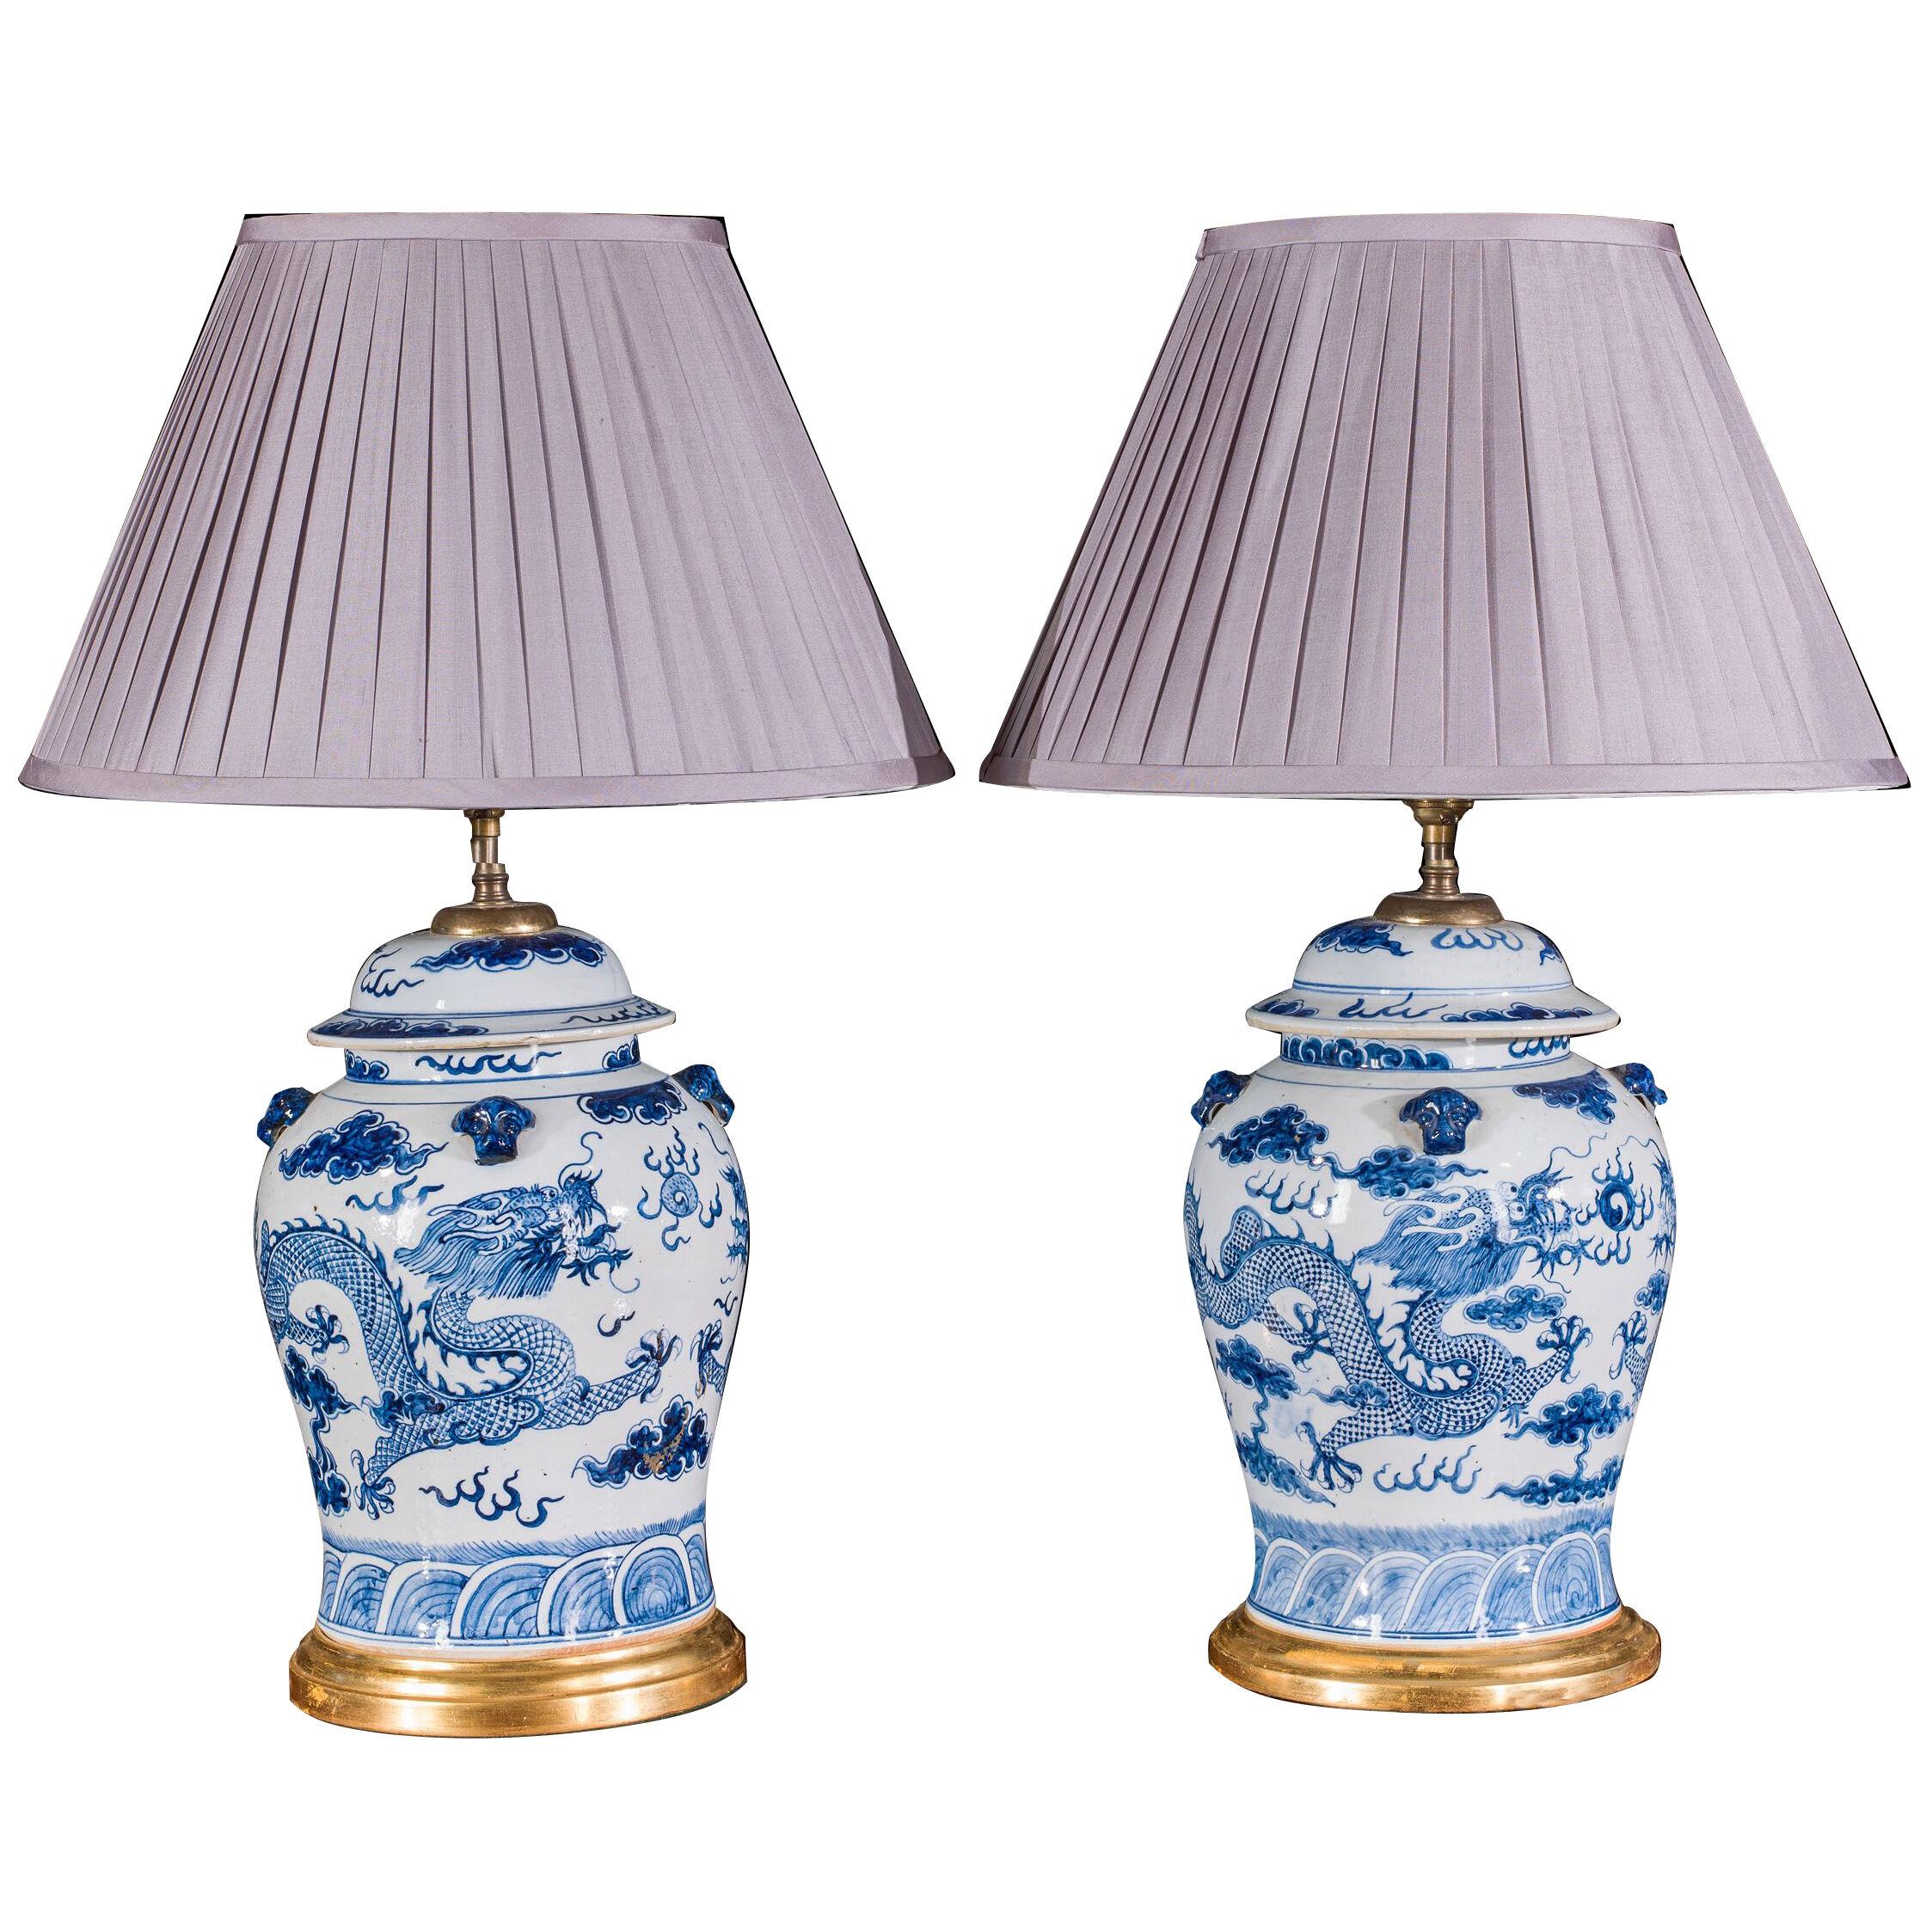 Grand Blue and White Chinese Vase Lamps